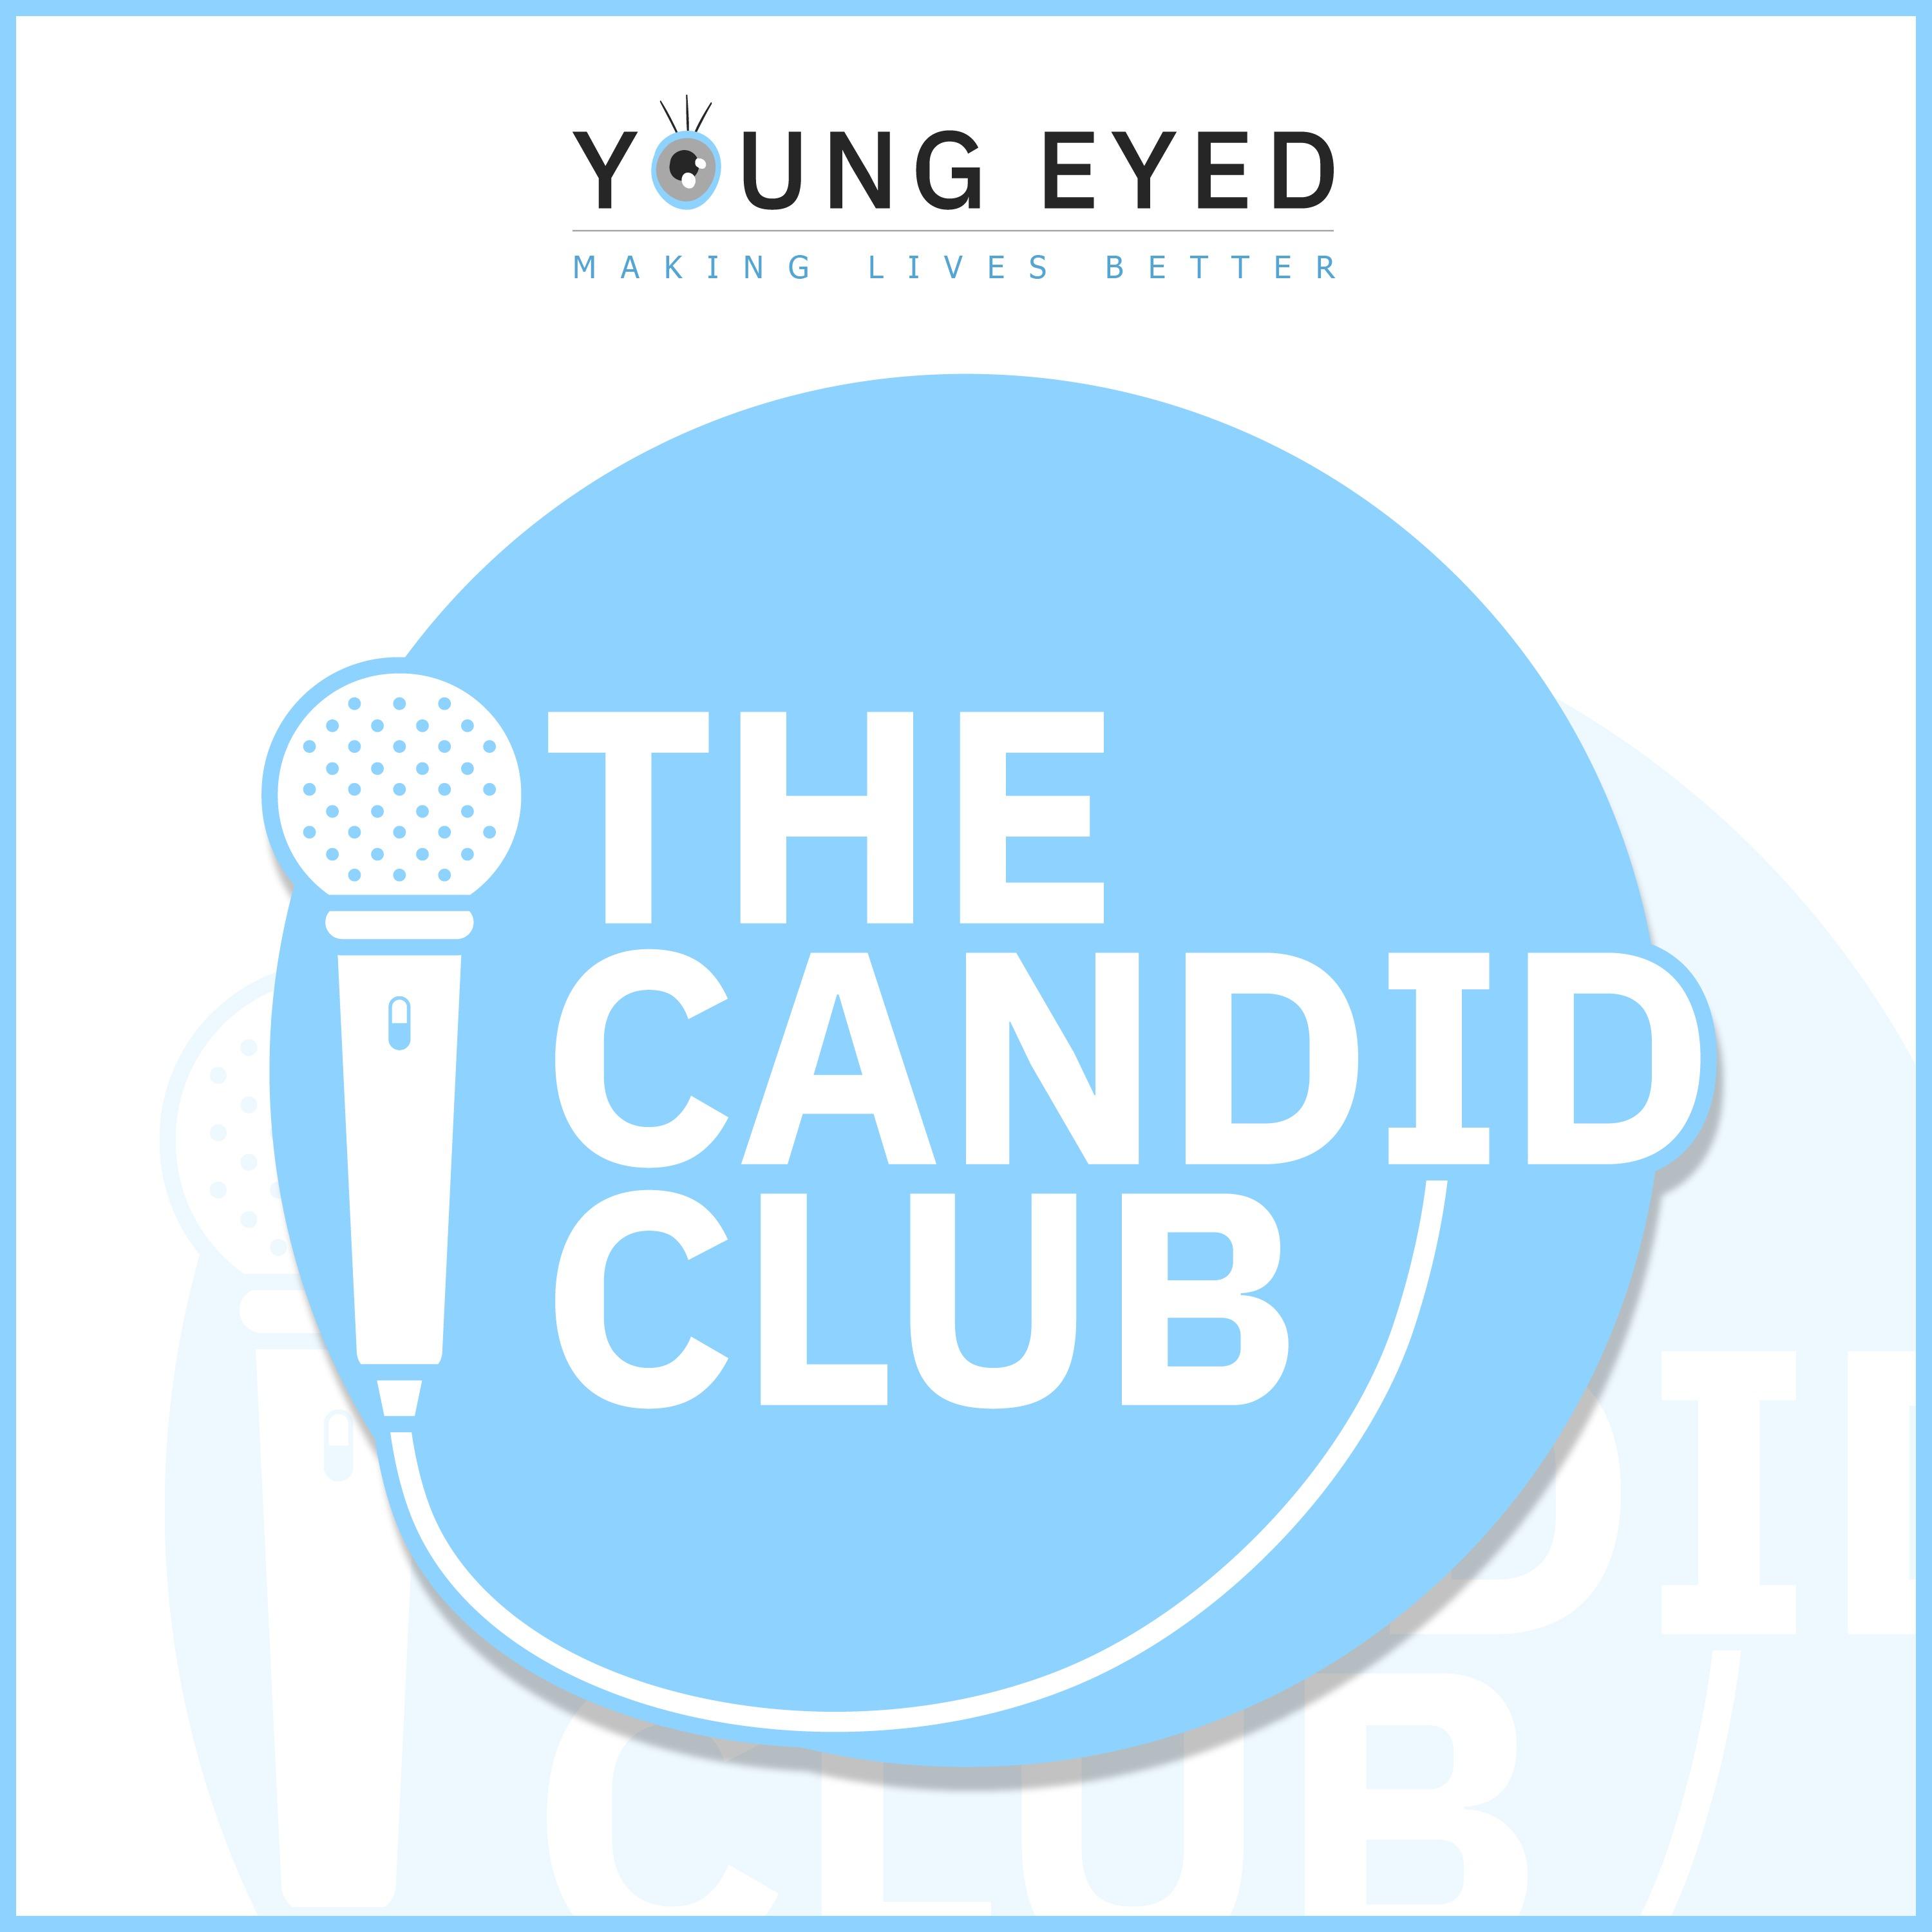 "THE CANDID CLUB" by Young Eyed